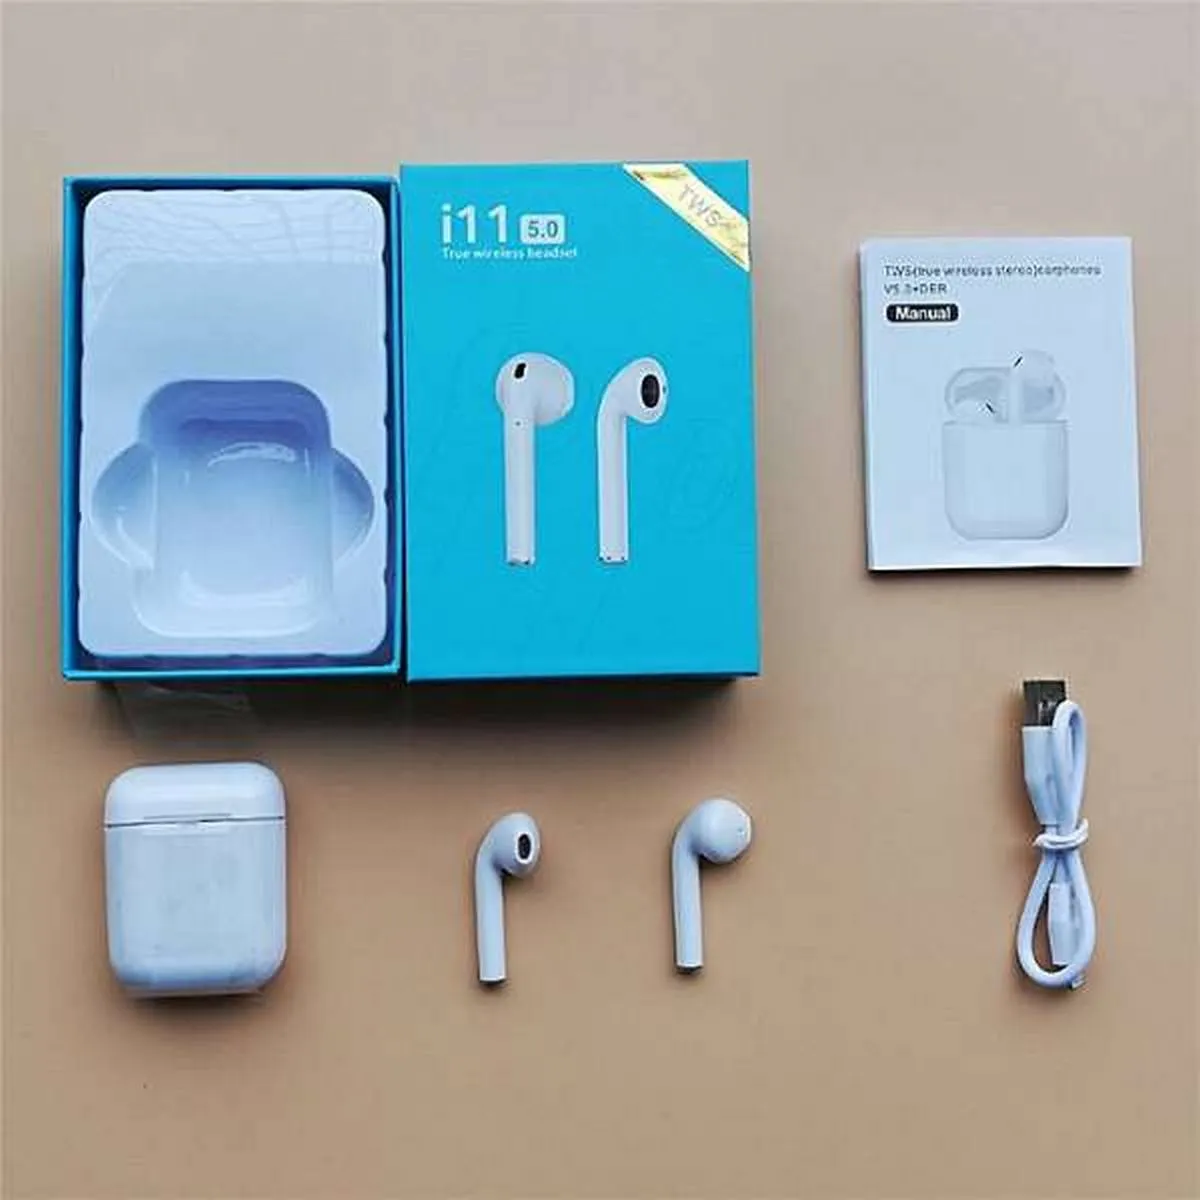 Buy I11 TWS Touch Wireless Earphones Bluetooth Earbuds Stereo Headset Headphone at best price in Pakistan | Rhizmall.pk